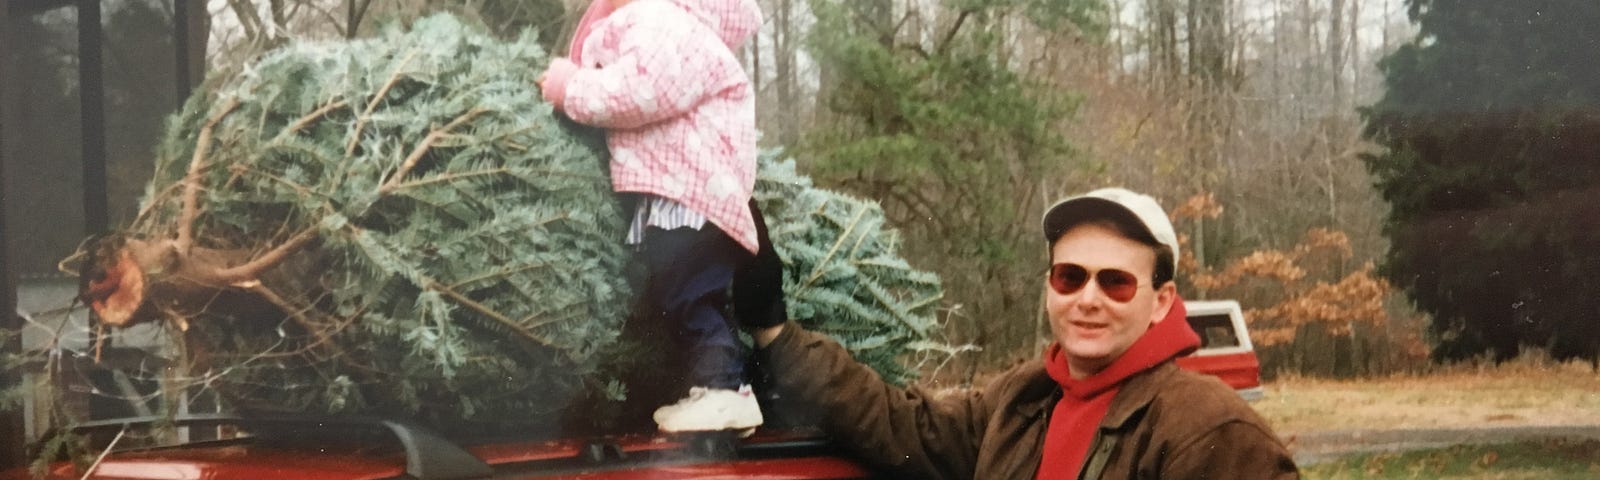 My dad loosely holds a 3-year-old me with one hand on top of the family car. I cling to a Christmas tree to keep from falling. He looks proud.